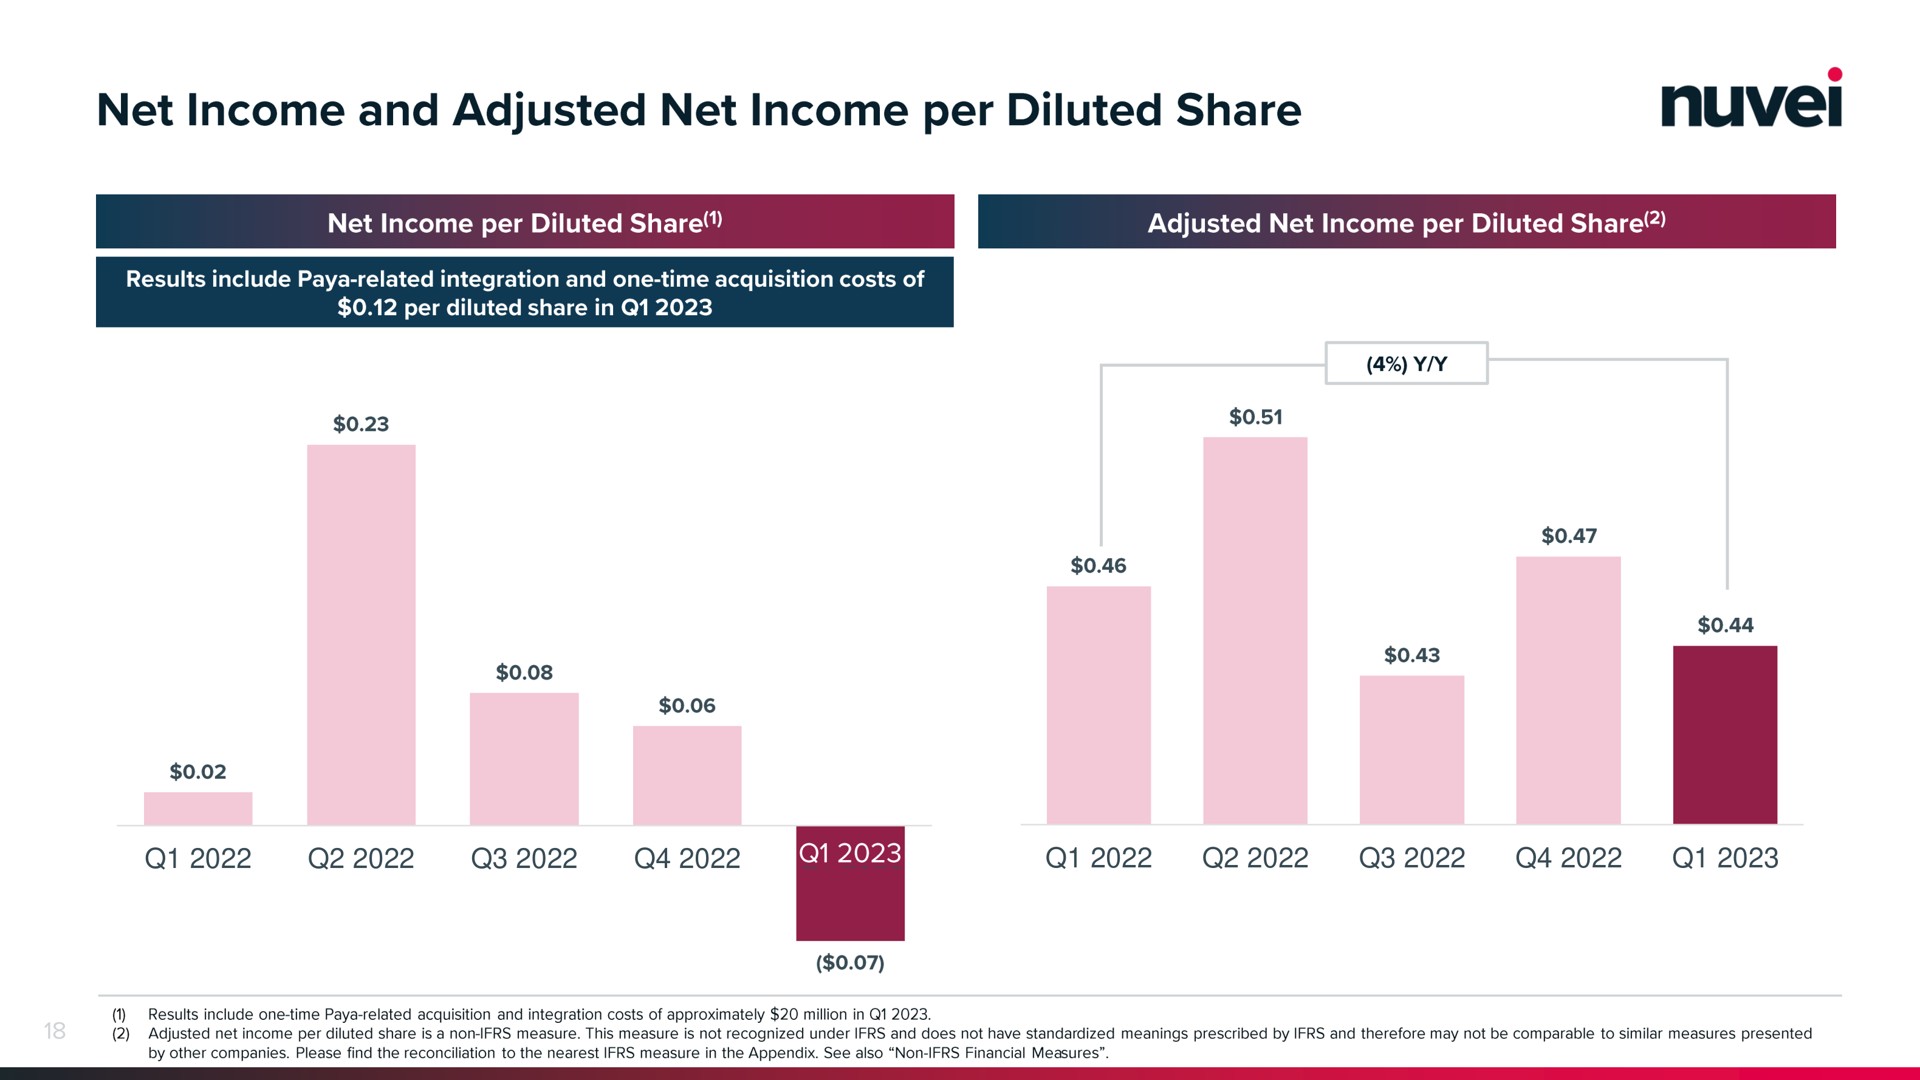 net income and adjusted net income per diluted share | Nuvei